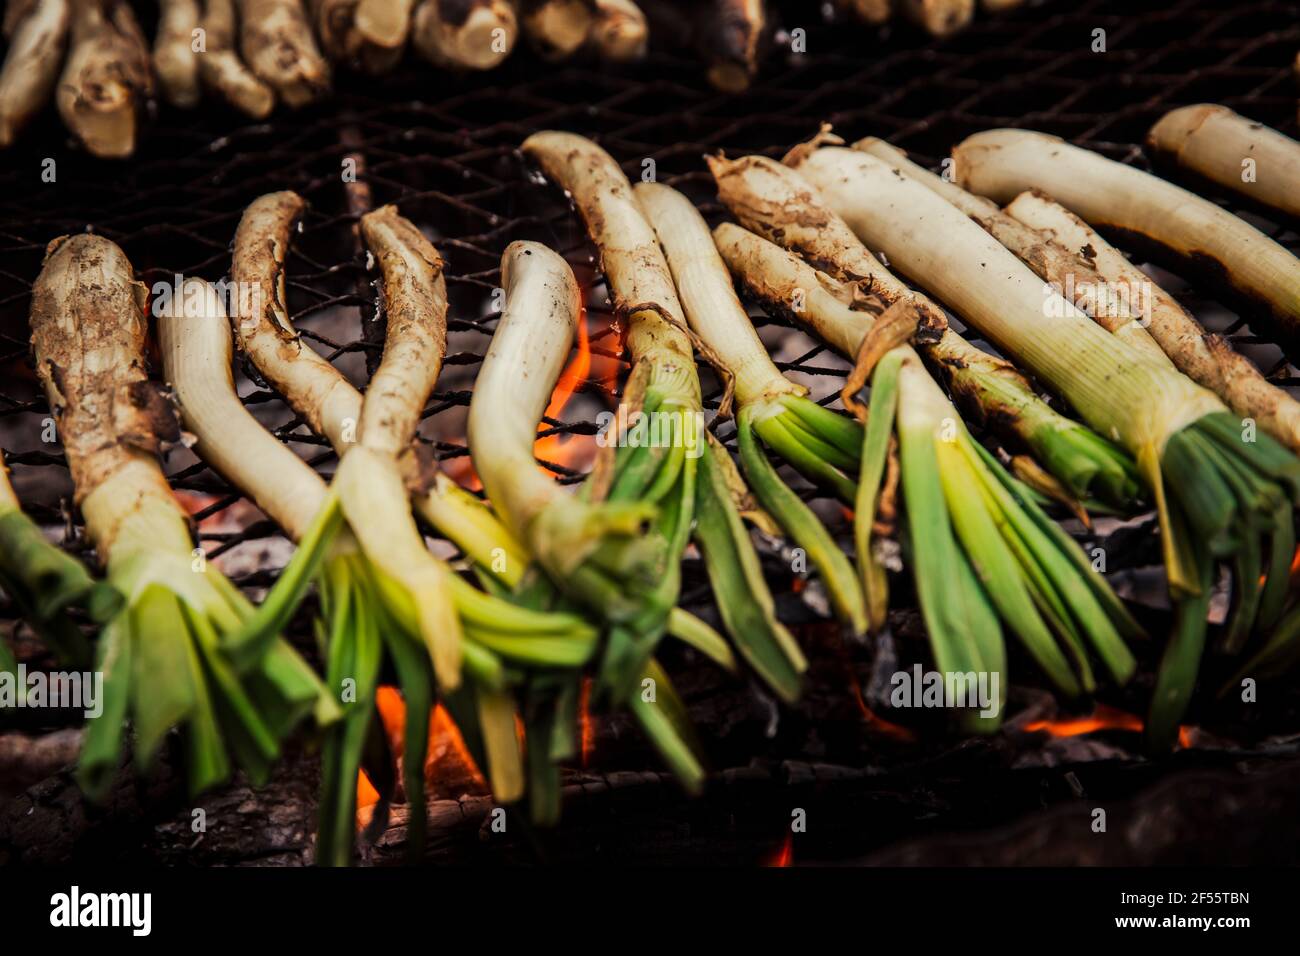 Scallions cooking on barbecue grill outdoors Stock Photo